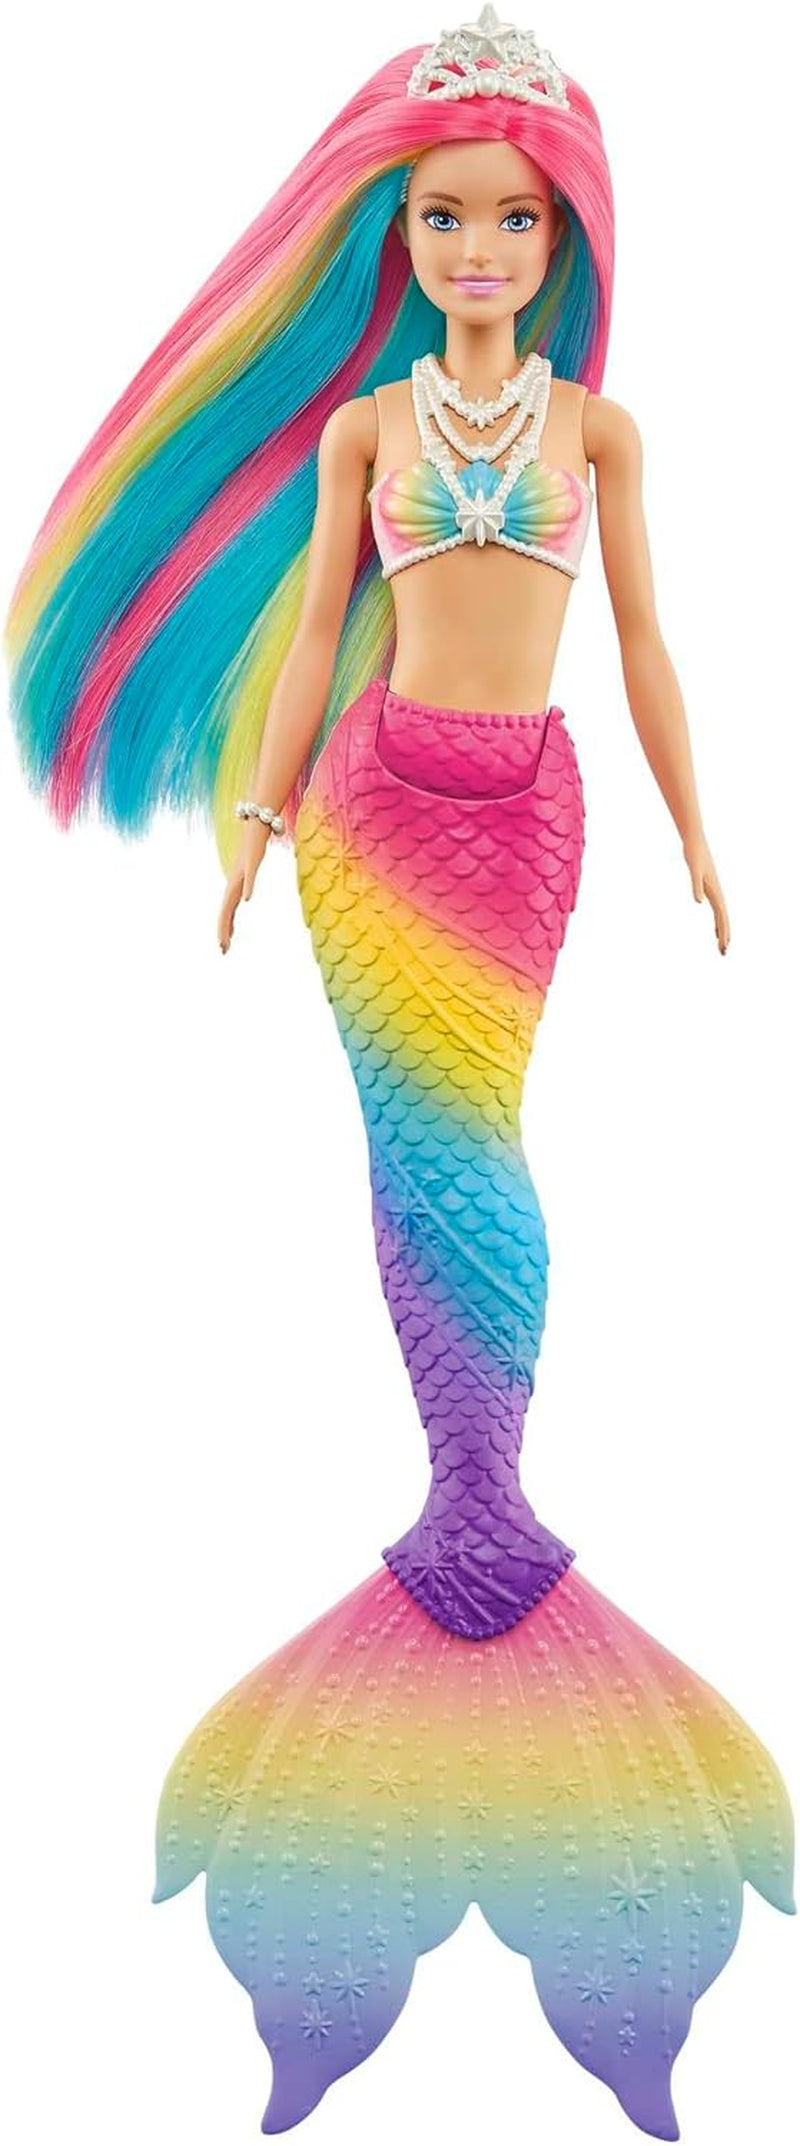 Dreamtopia Mermaid Doll, Rainbow Hair  Doll with Blue Eyes, Water Activated Colour Changing Doll, Toys for Ages 3 and Up, One Mermaid  Doll, GTF89